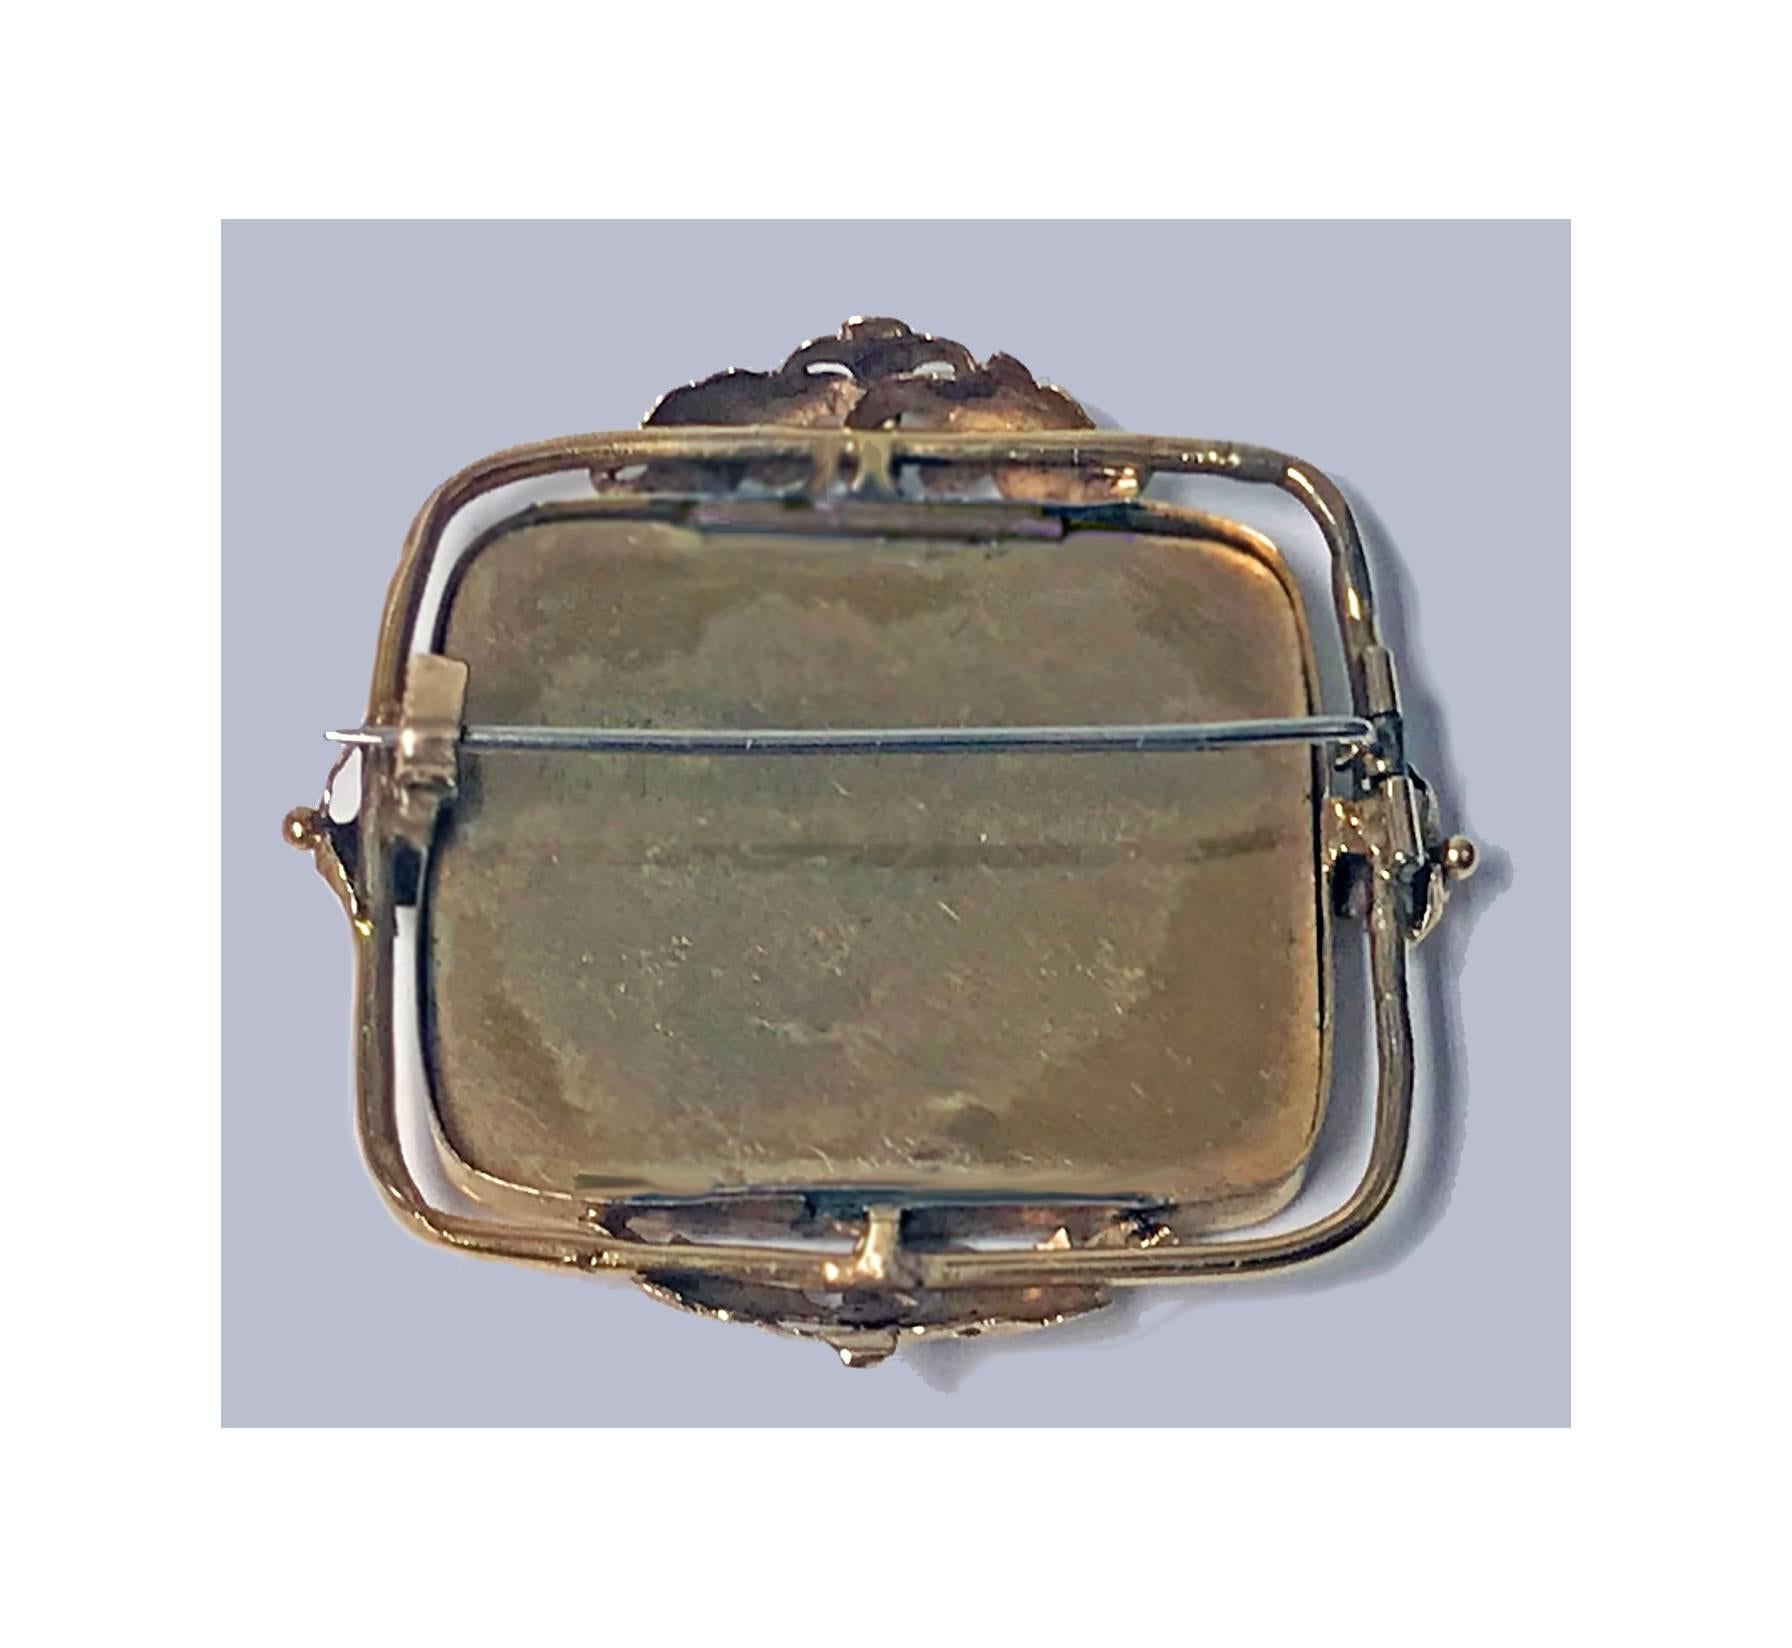 the brooch contains a miniature picture